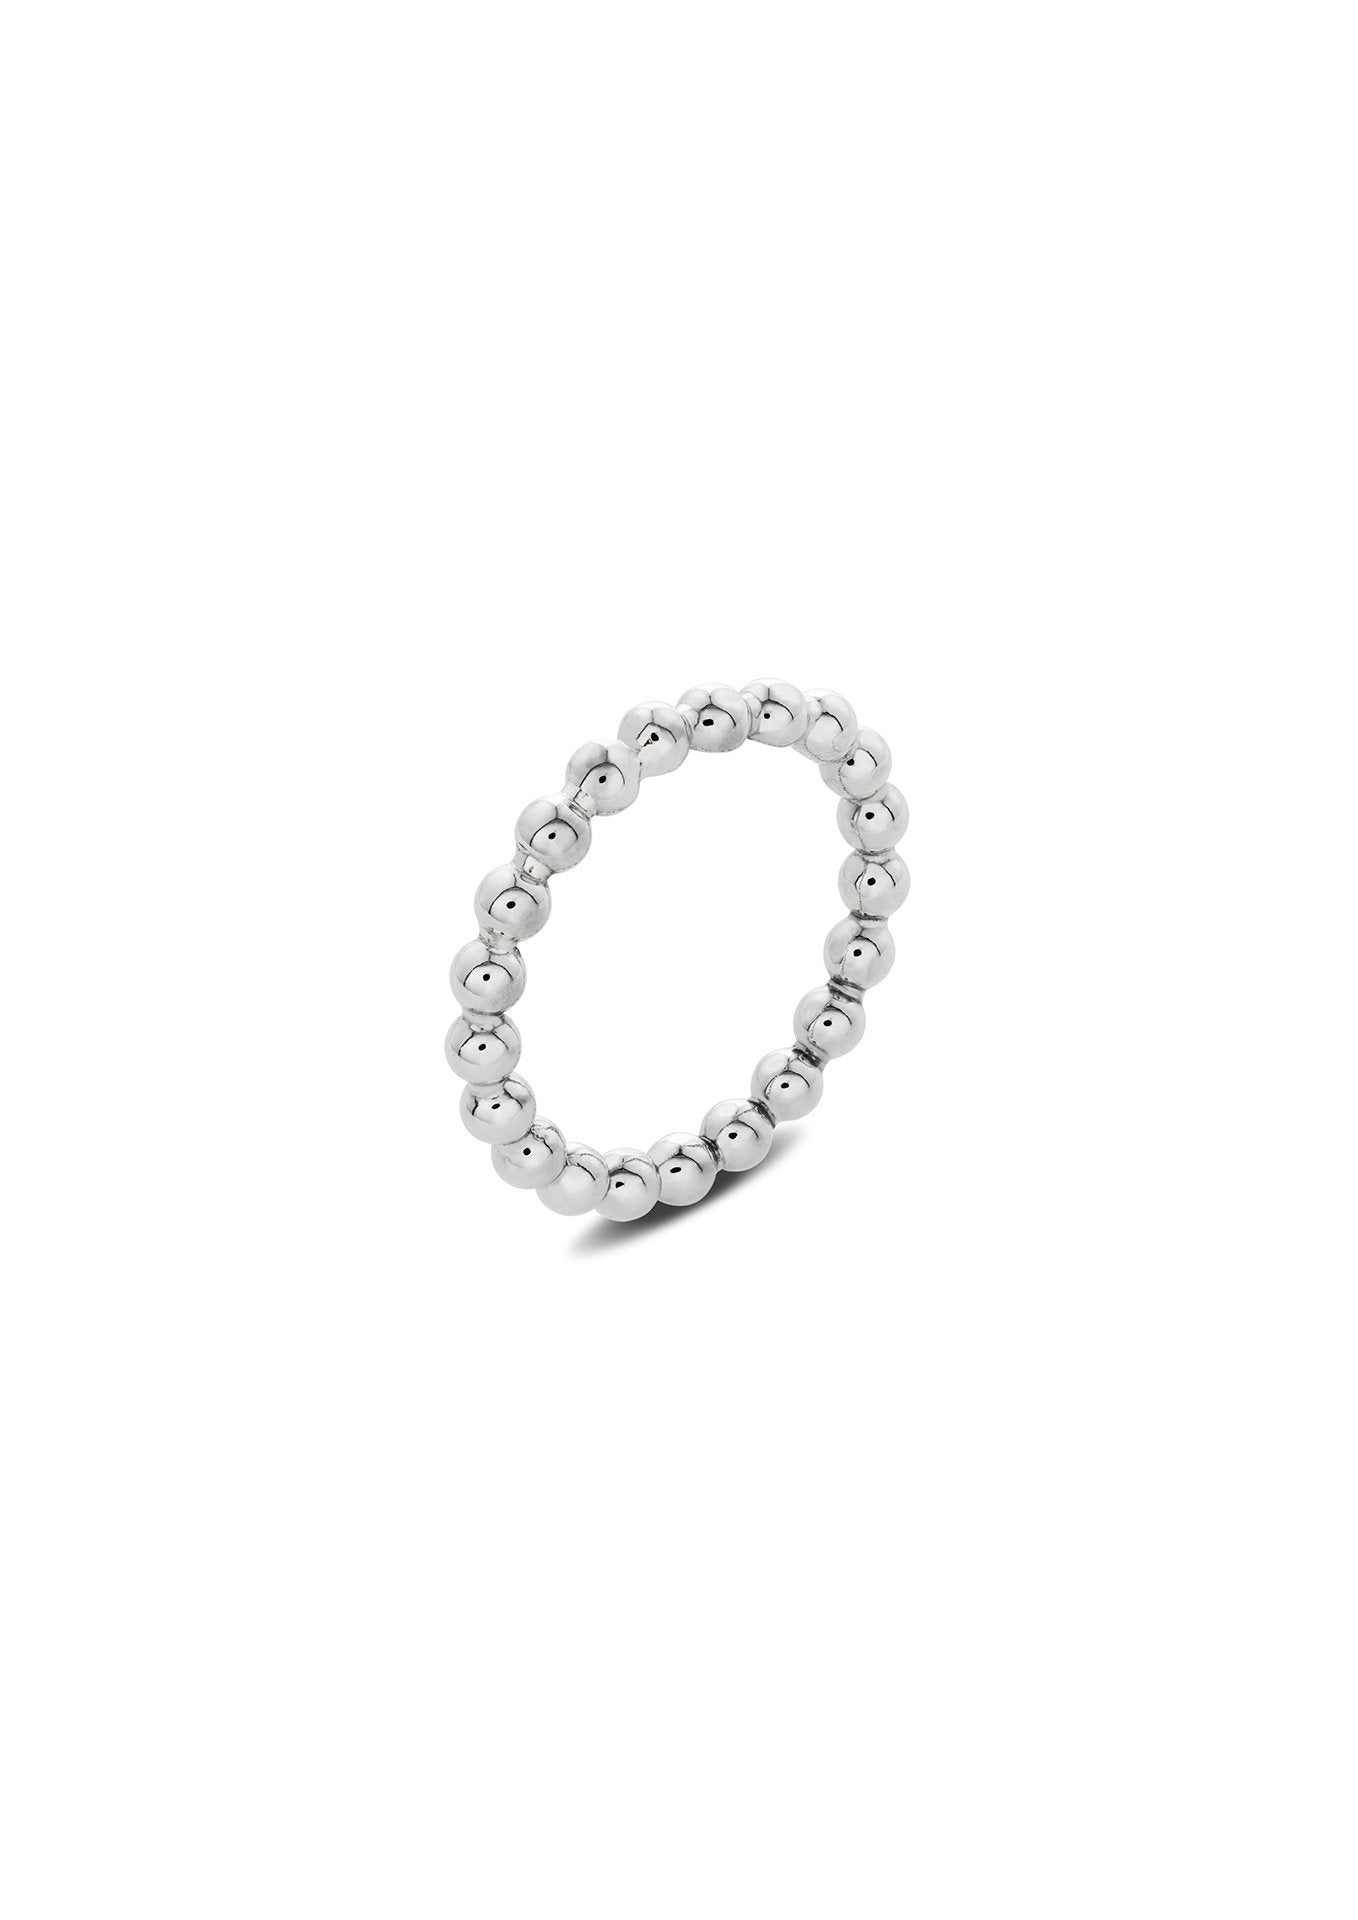 NO MORE accessories Bold Champagne Ring in sterling silver